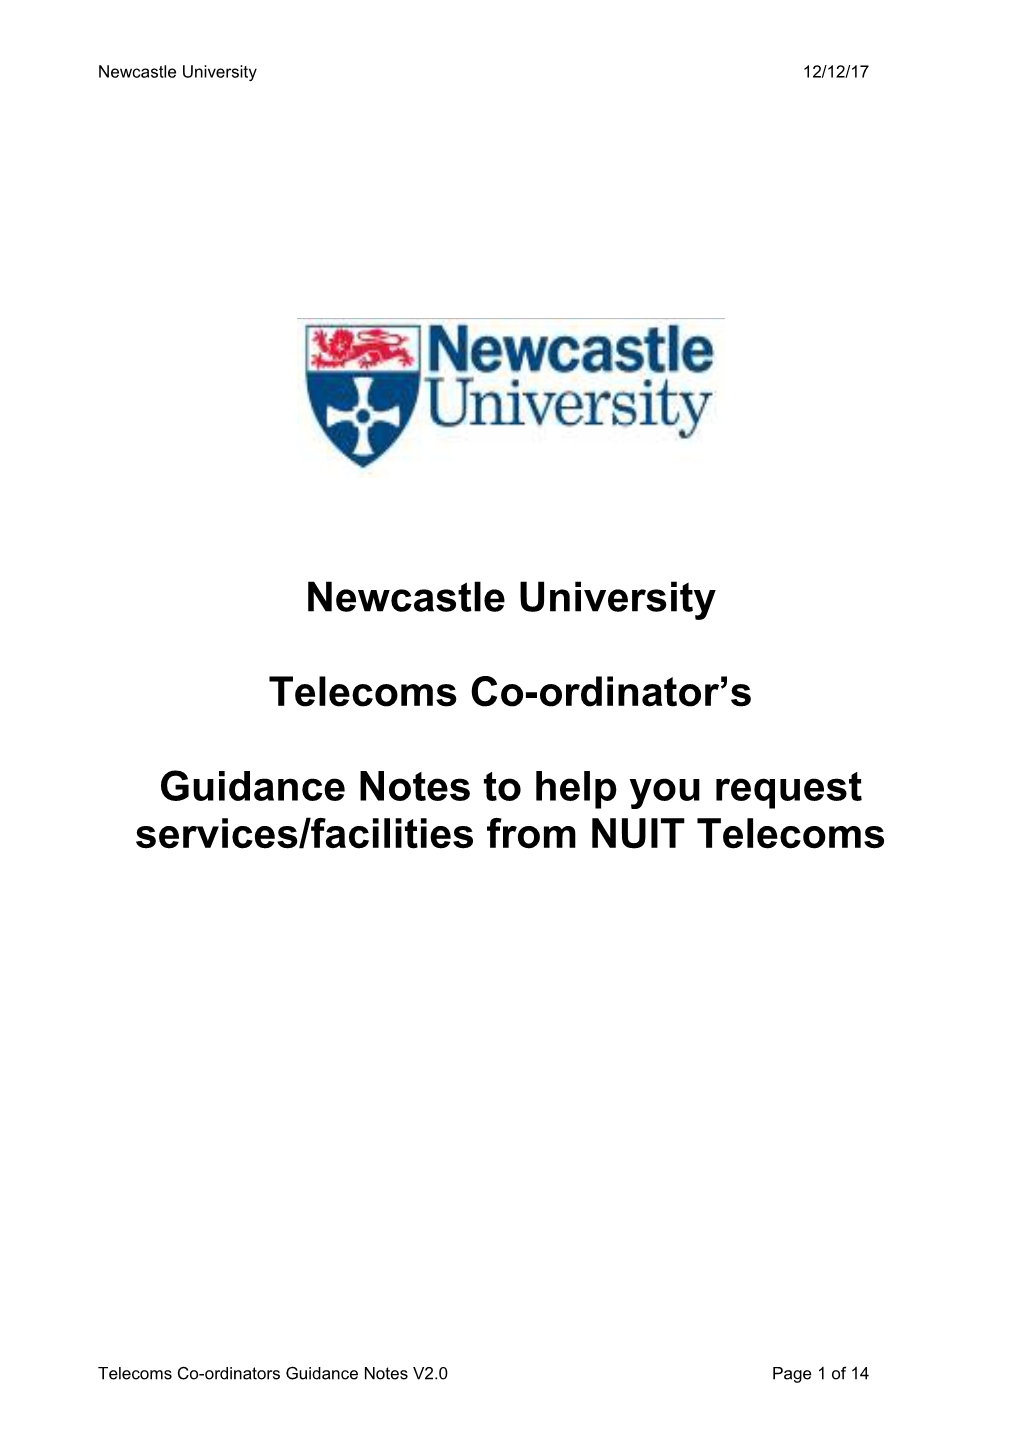 Guidance Notes to Help You Request Services/Facilities from NUIT Telecoms